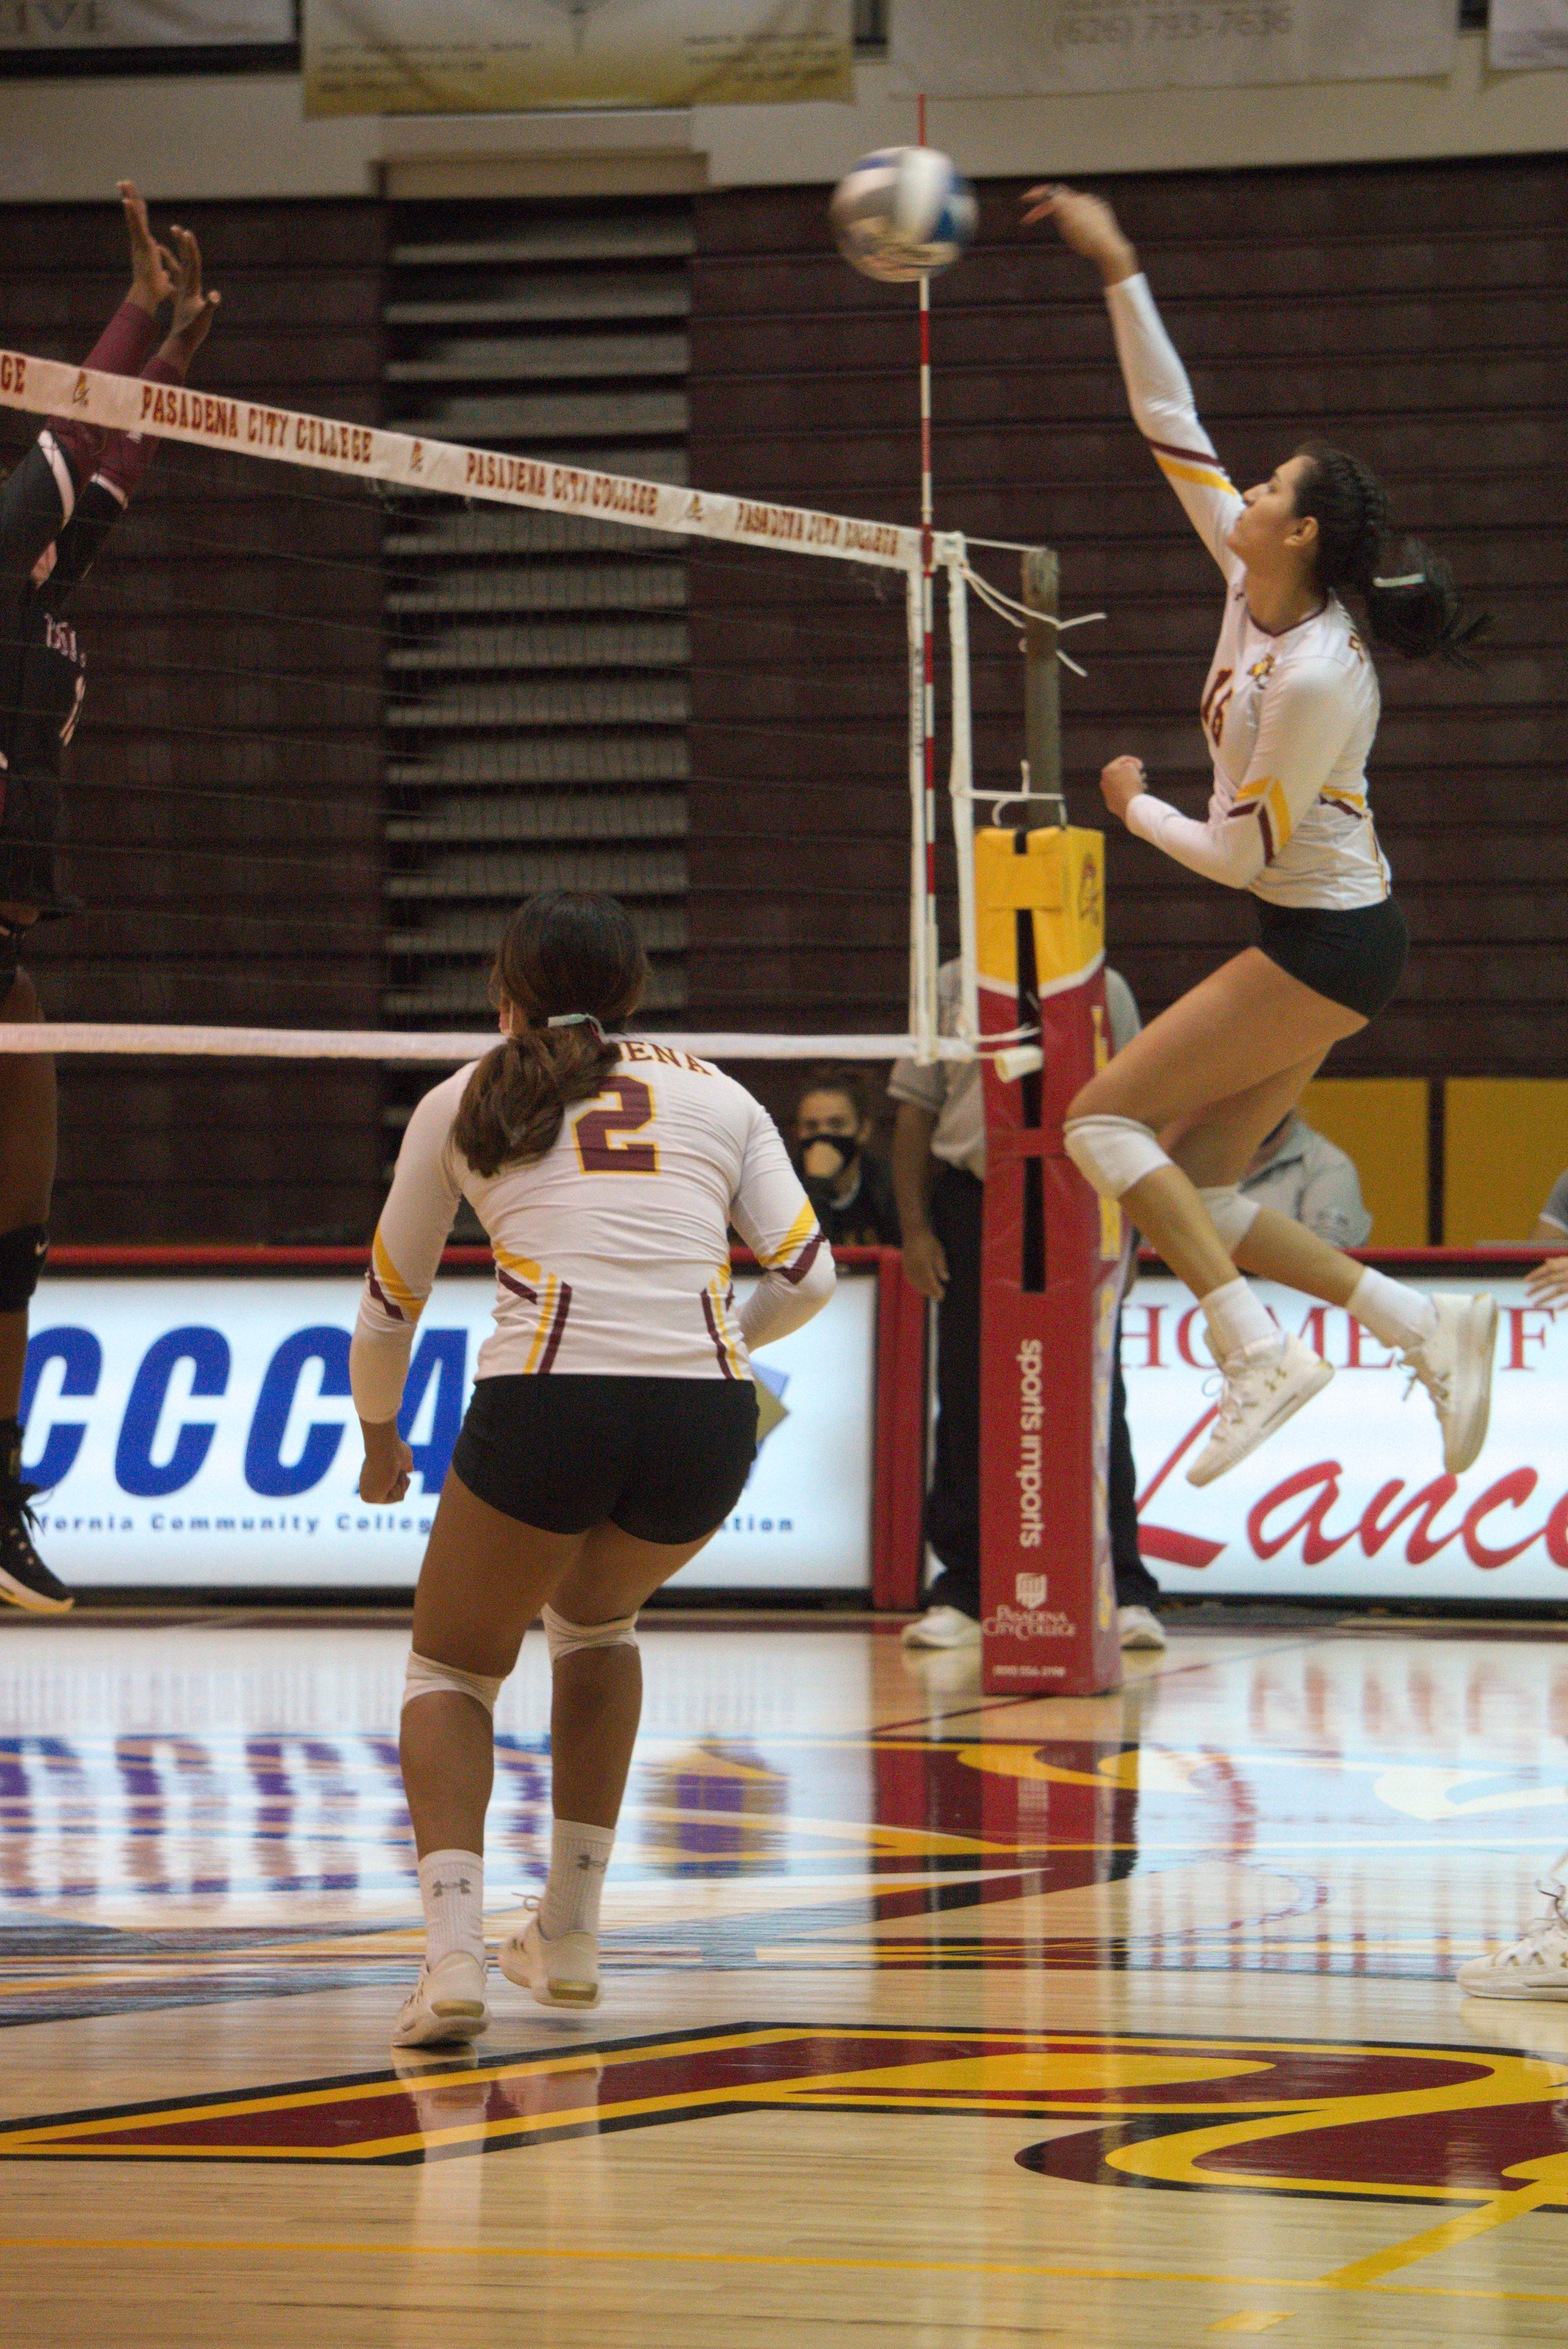 Paulina Lopez goes up for the attack during PCC's win over Mt. SAC on Wednesday night (photo by Ken McLin).